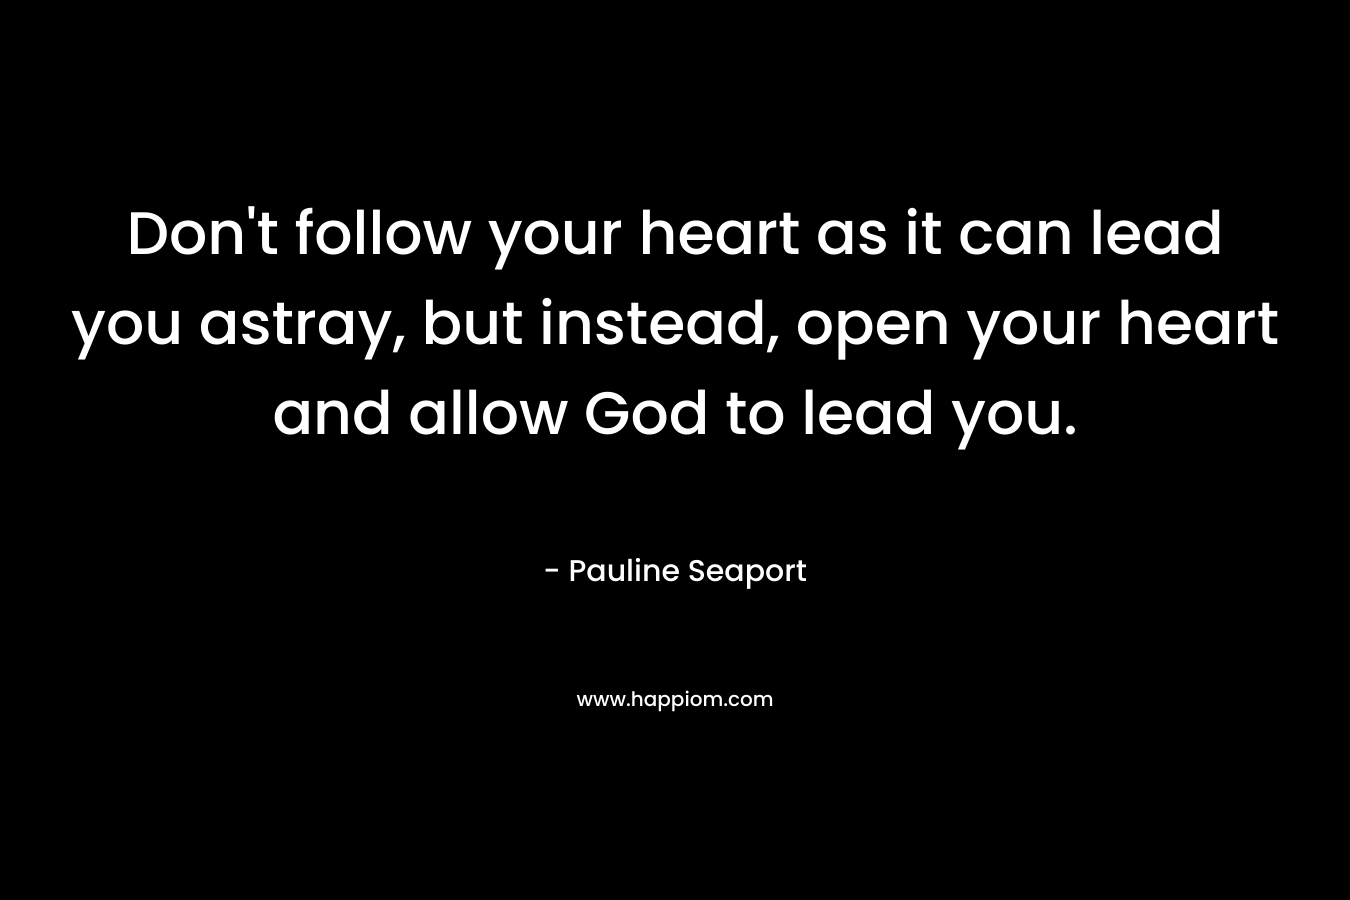 Don’t follow your heart as it can lead you astray, but instead, open your heart and allow God to lead you. – Pauline Seaport